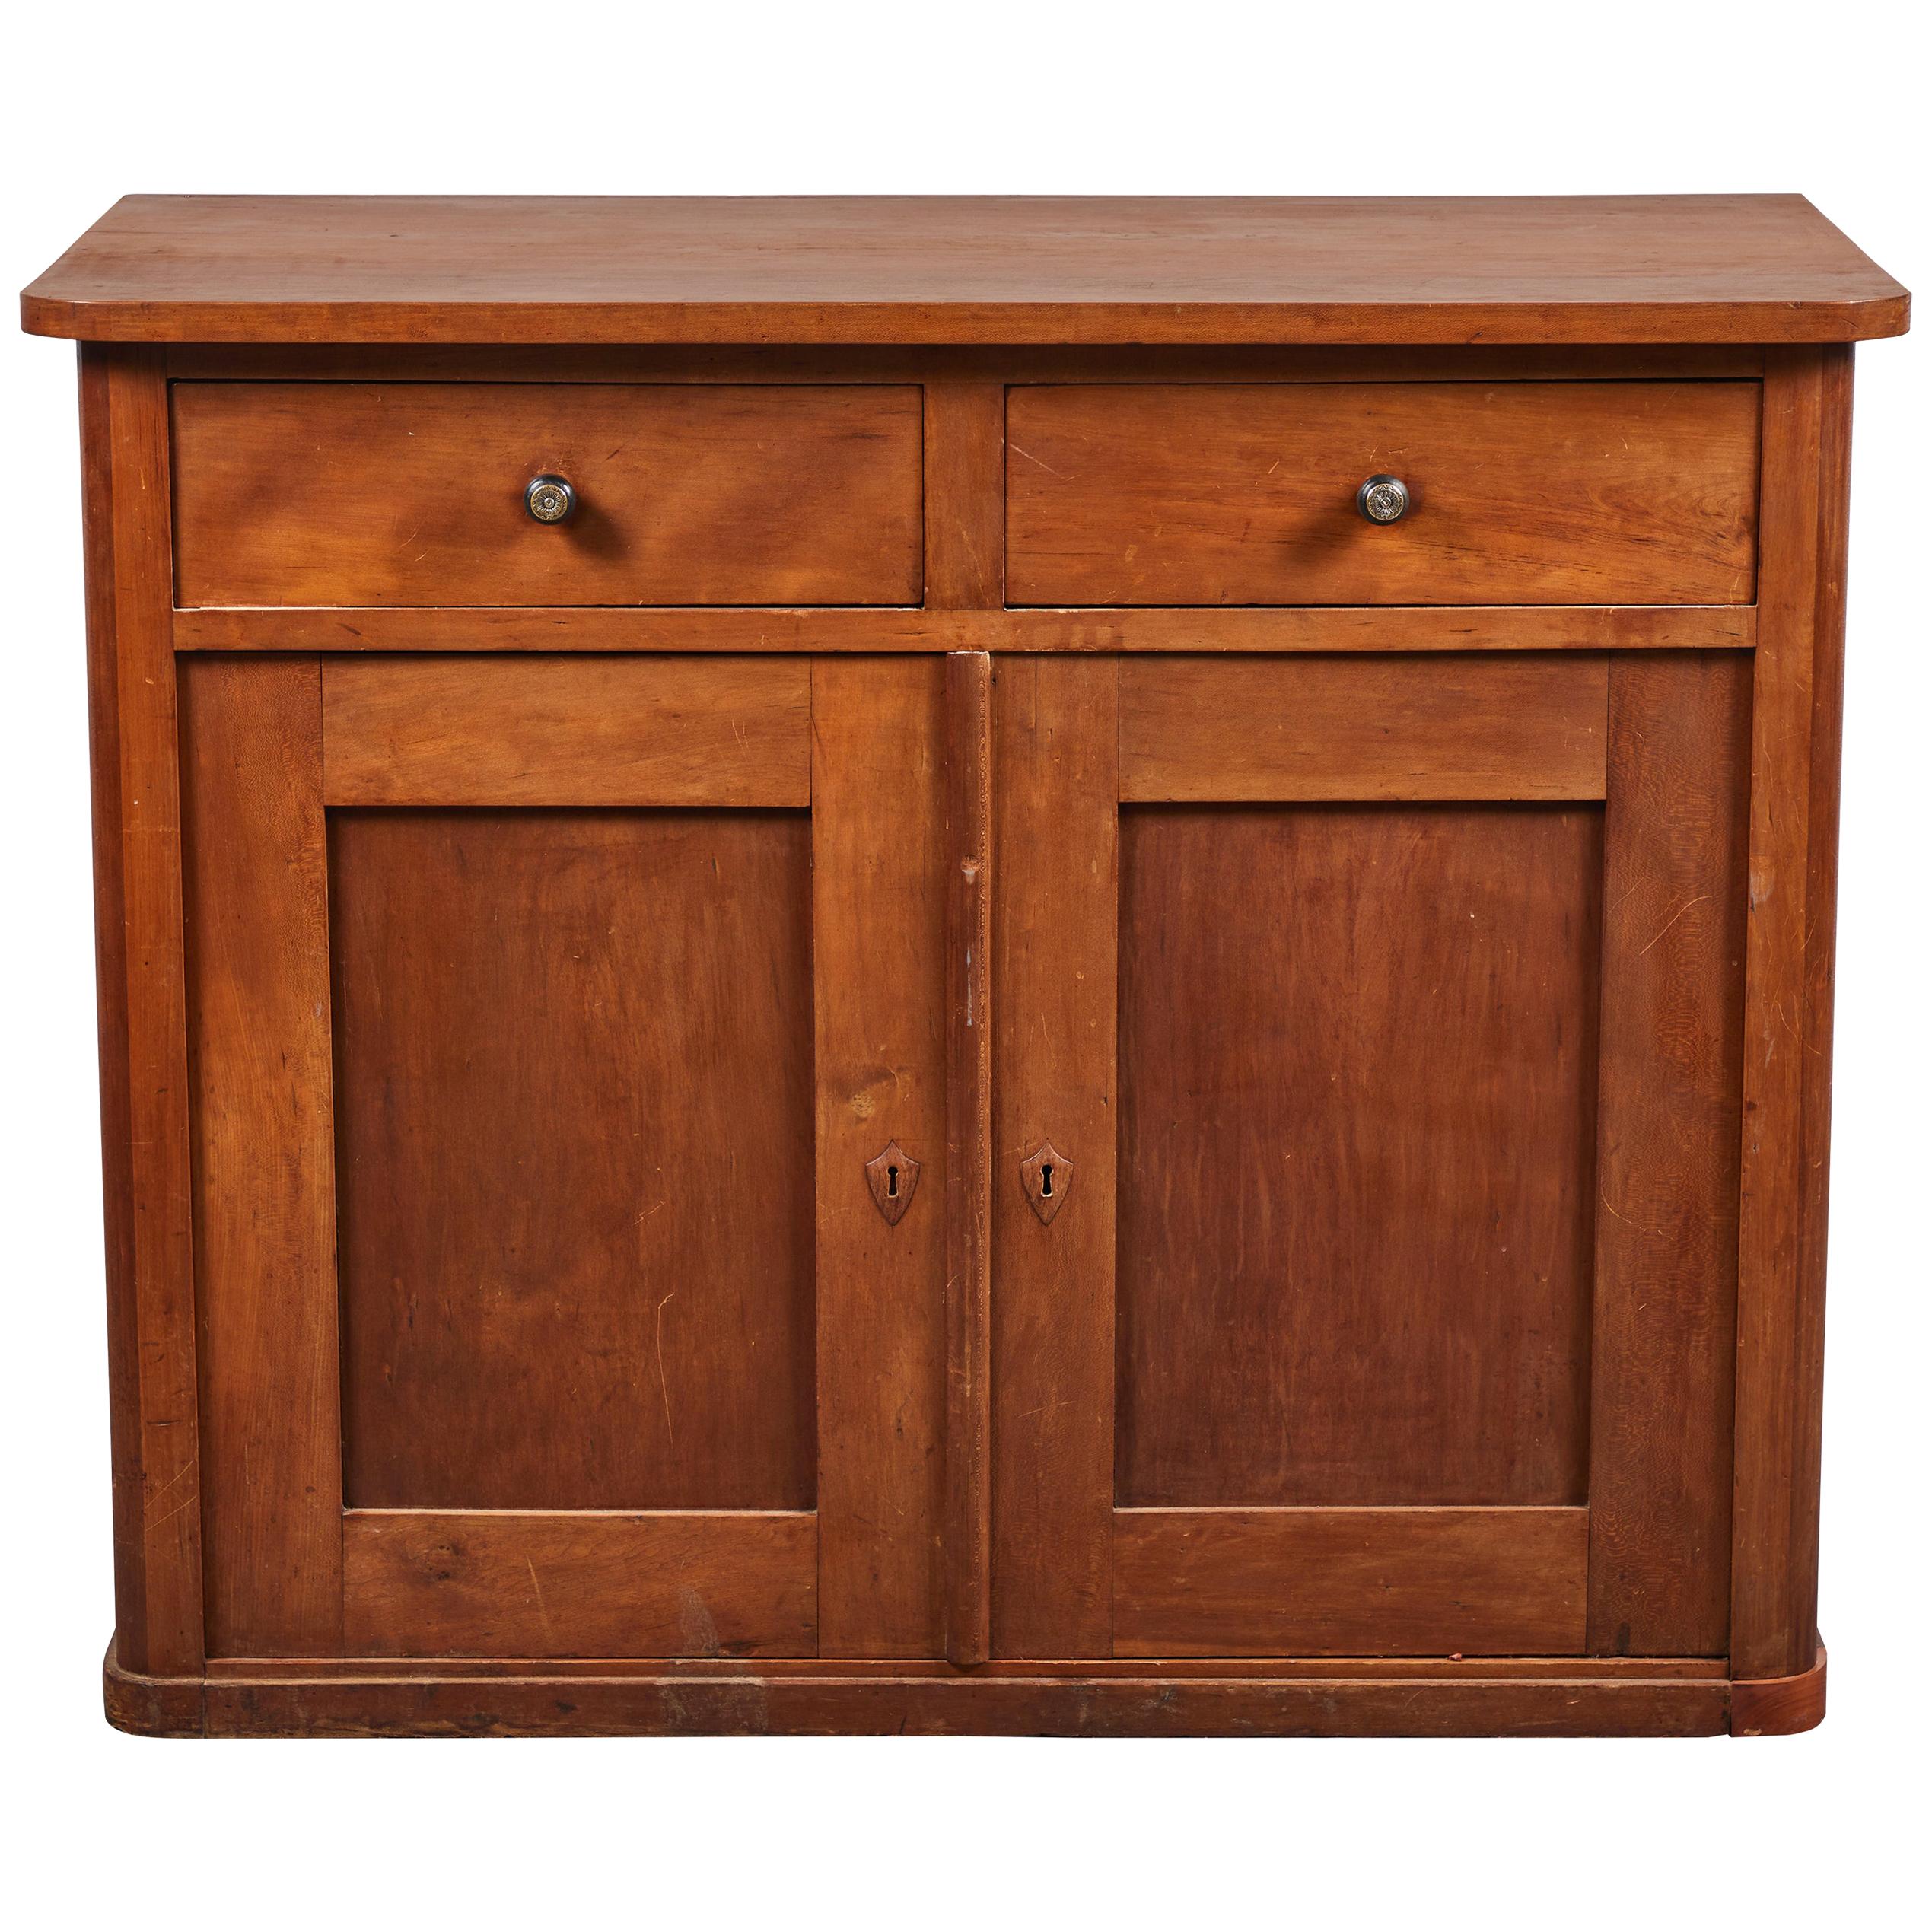 Early American Cherry Two-Door Two-Drawer Cabinet